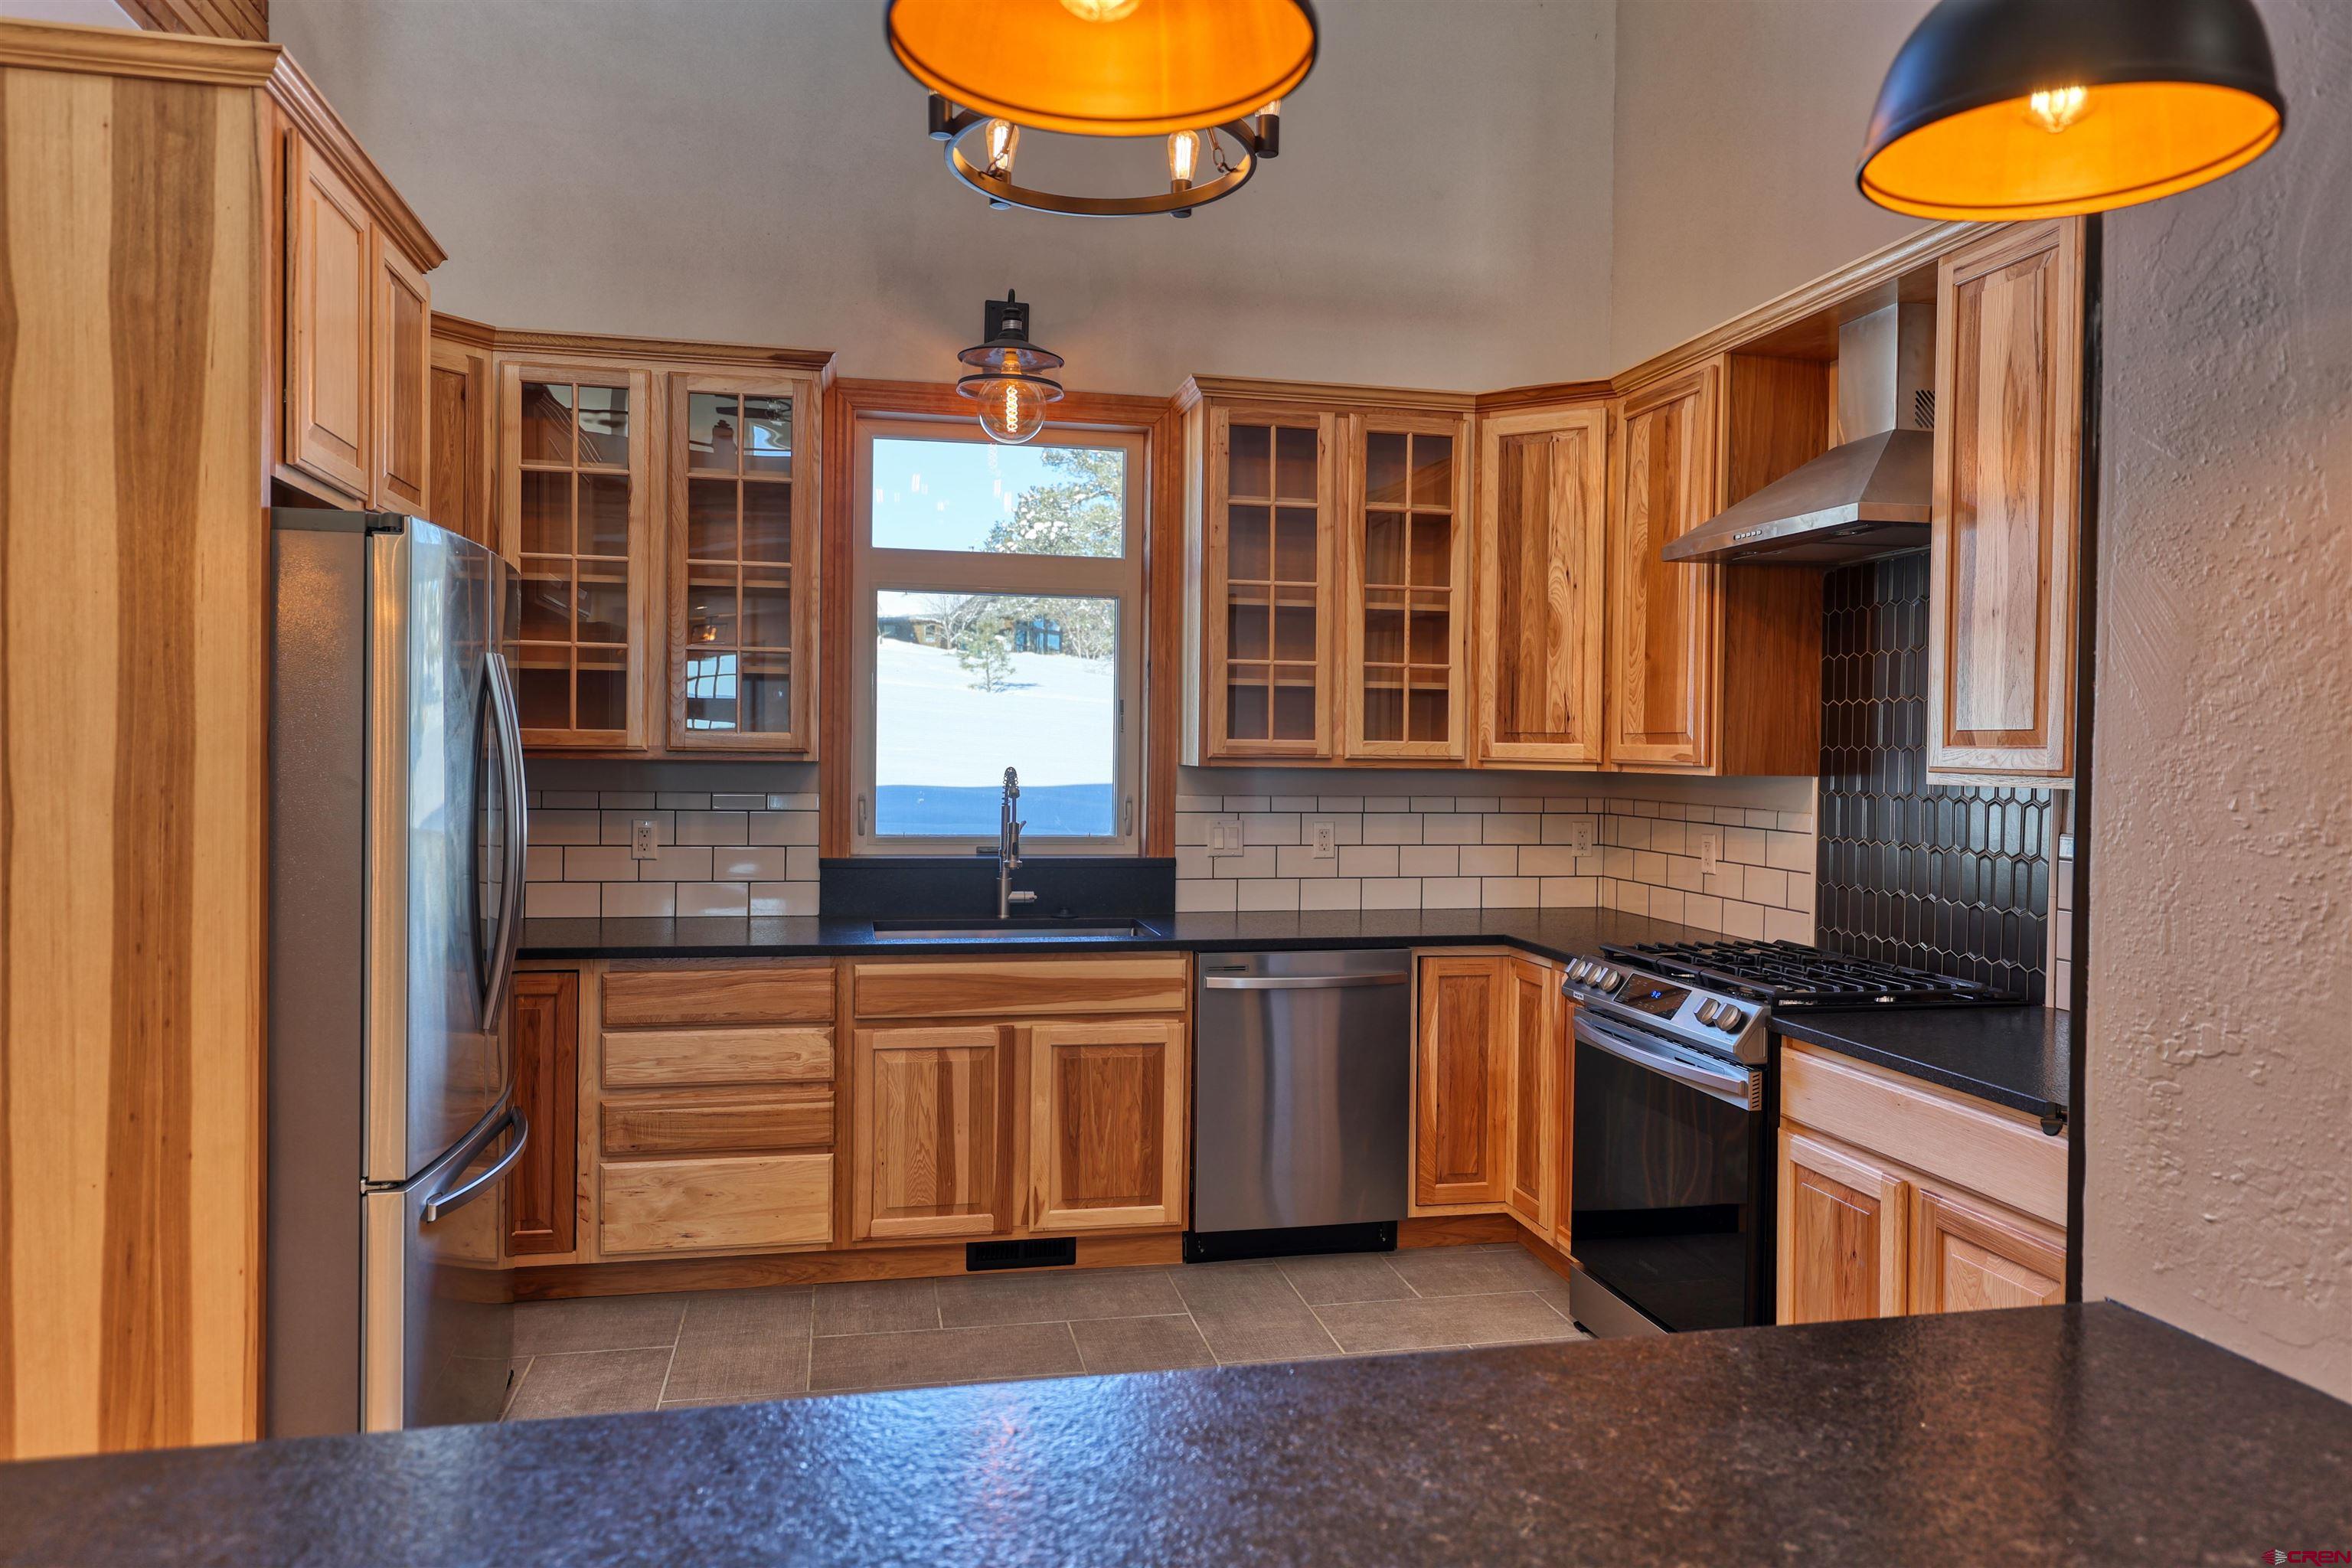 66 Pines Club Place, Pagosa Springs, CO 81147 Listing Photo  3